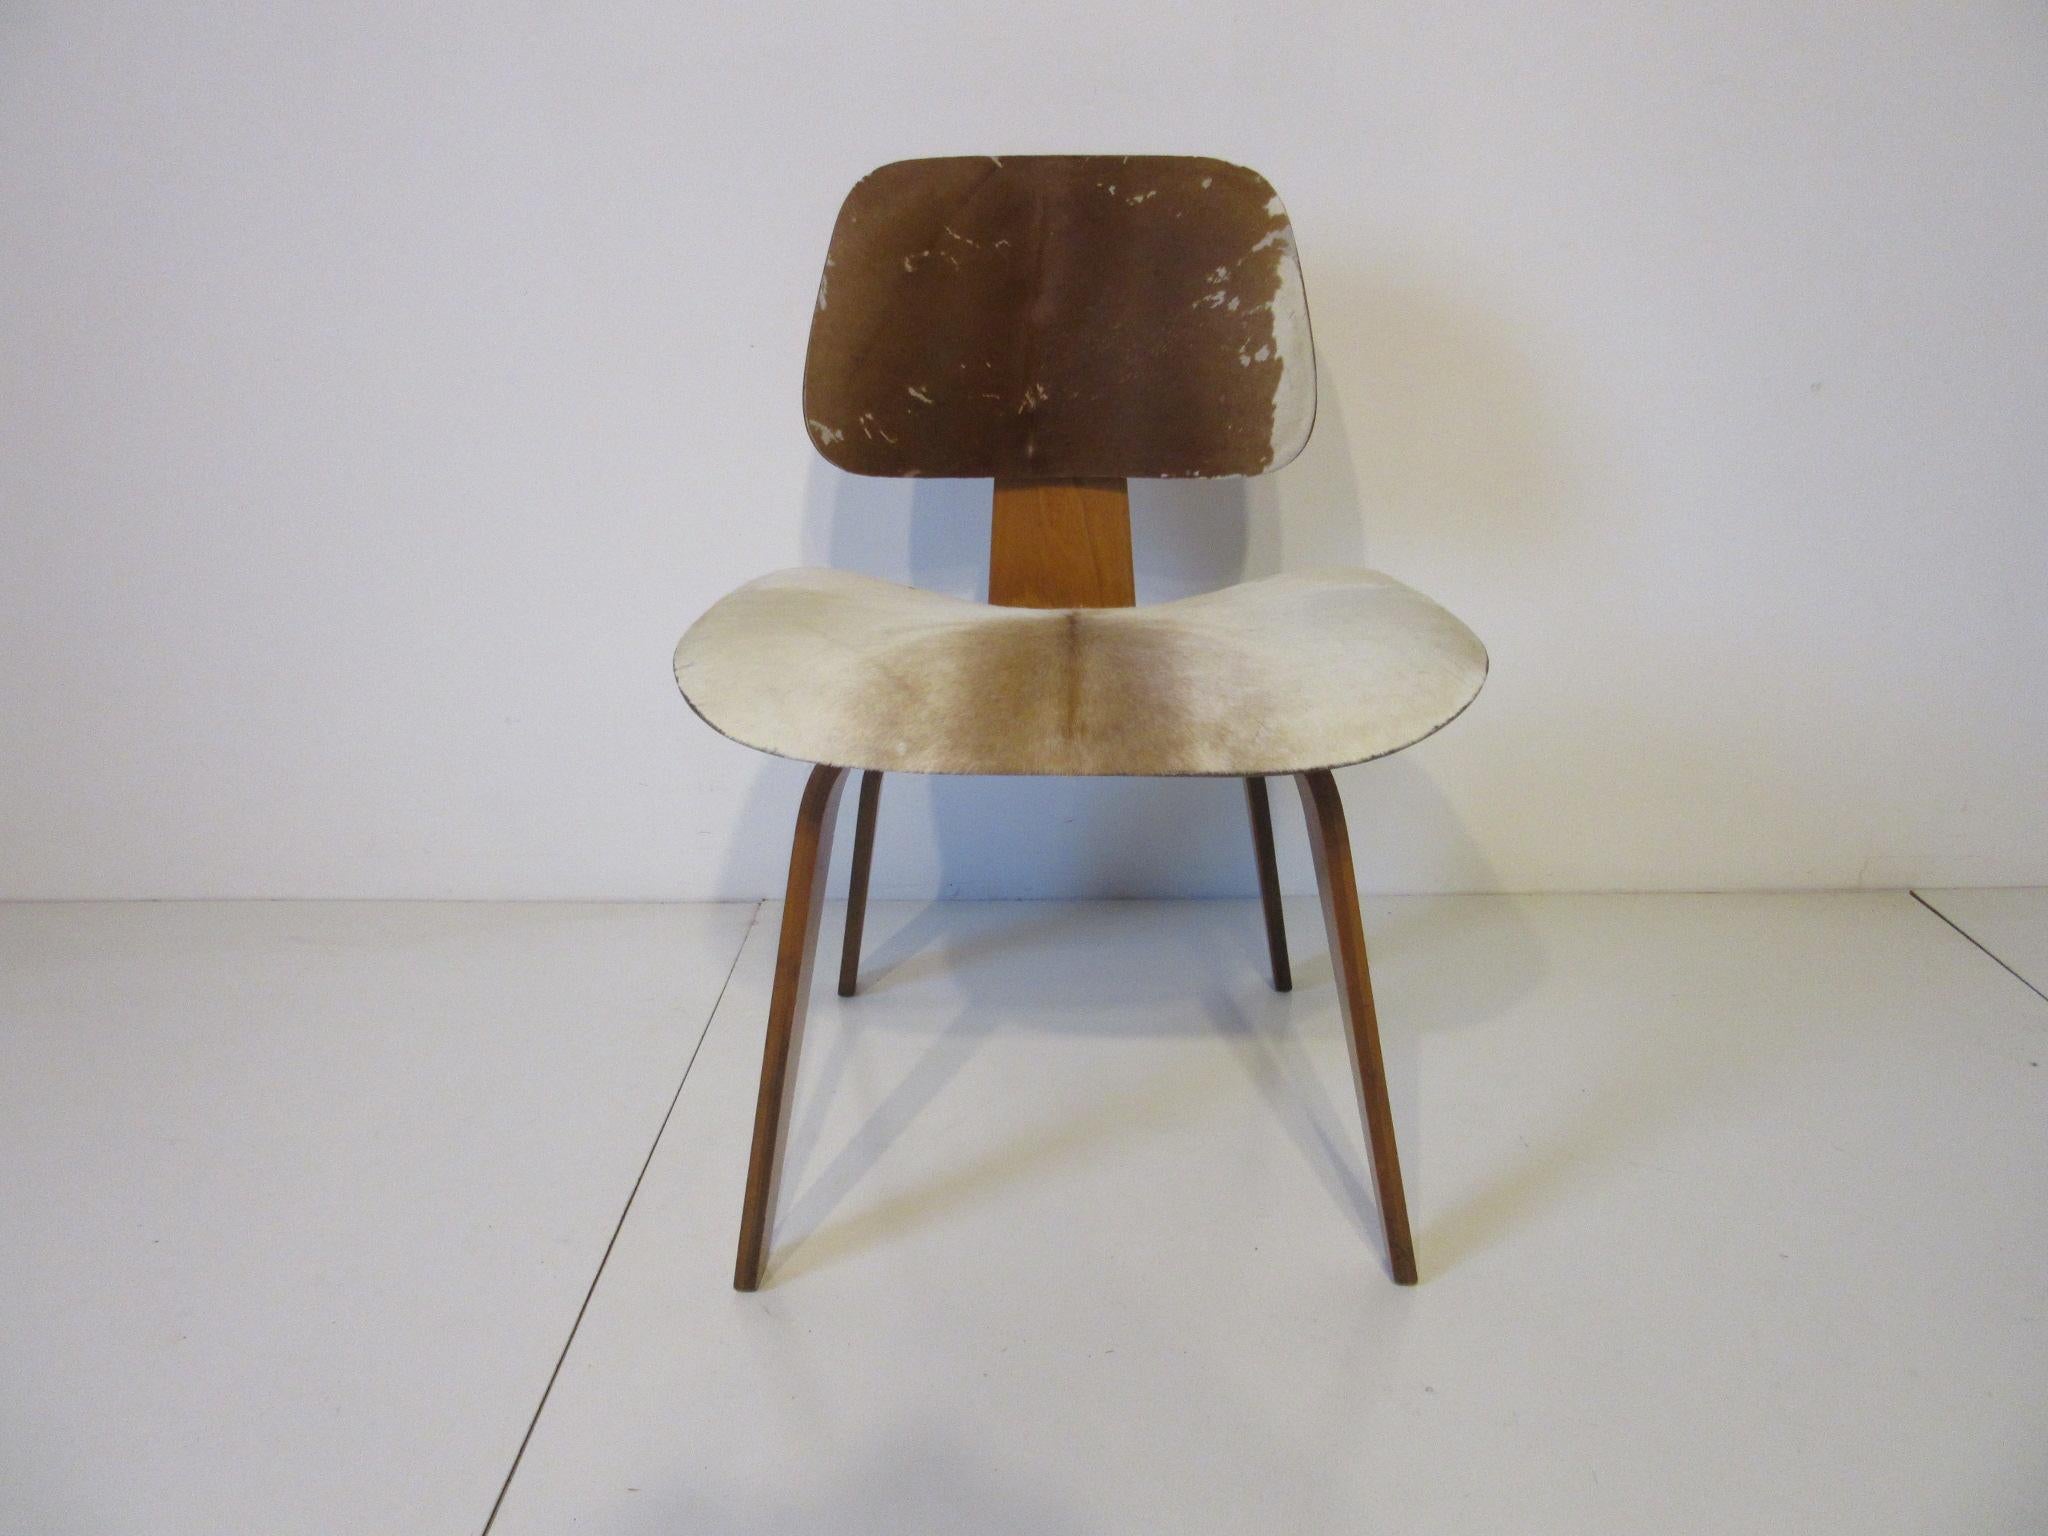 A molded ash plywood DCW (dining chair wood) frame with slunk skin upholstered seat and seat back. Produced between 1948-1953 and having the early 12 screw configuration to the bottom these were a special order item from the manufacture Evans